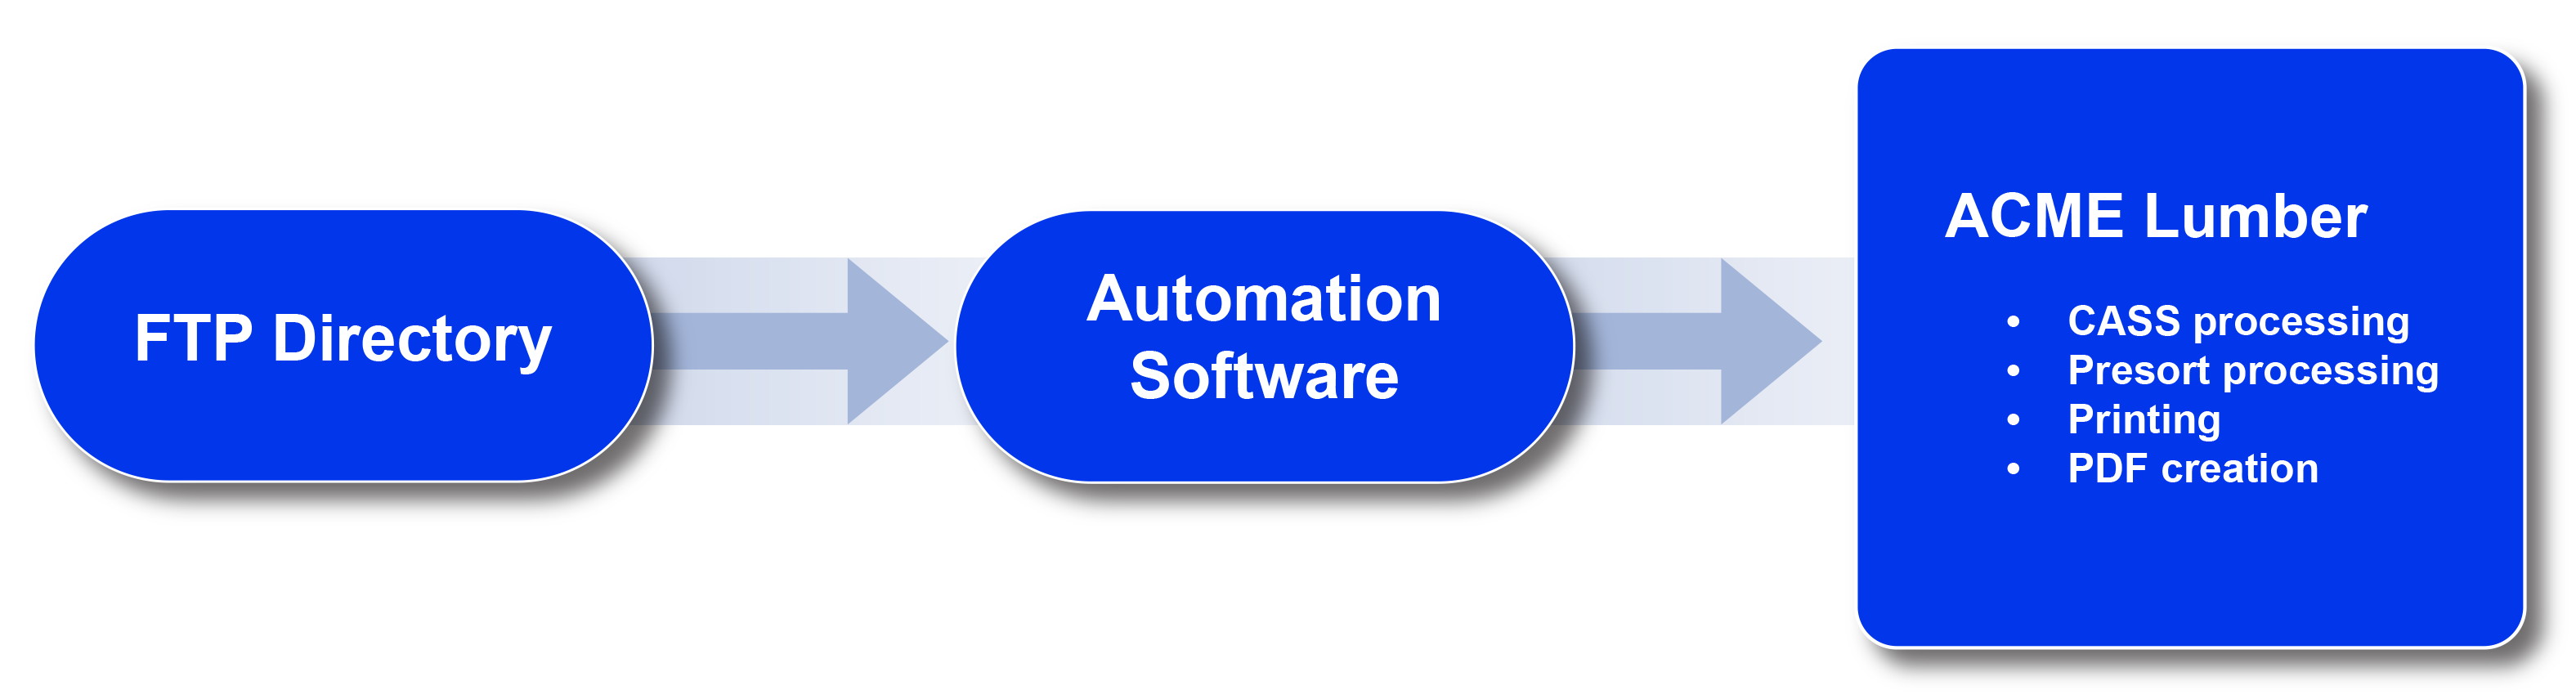 Automation software simplifies processing